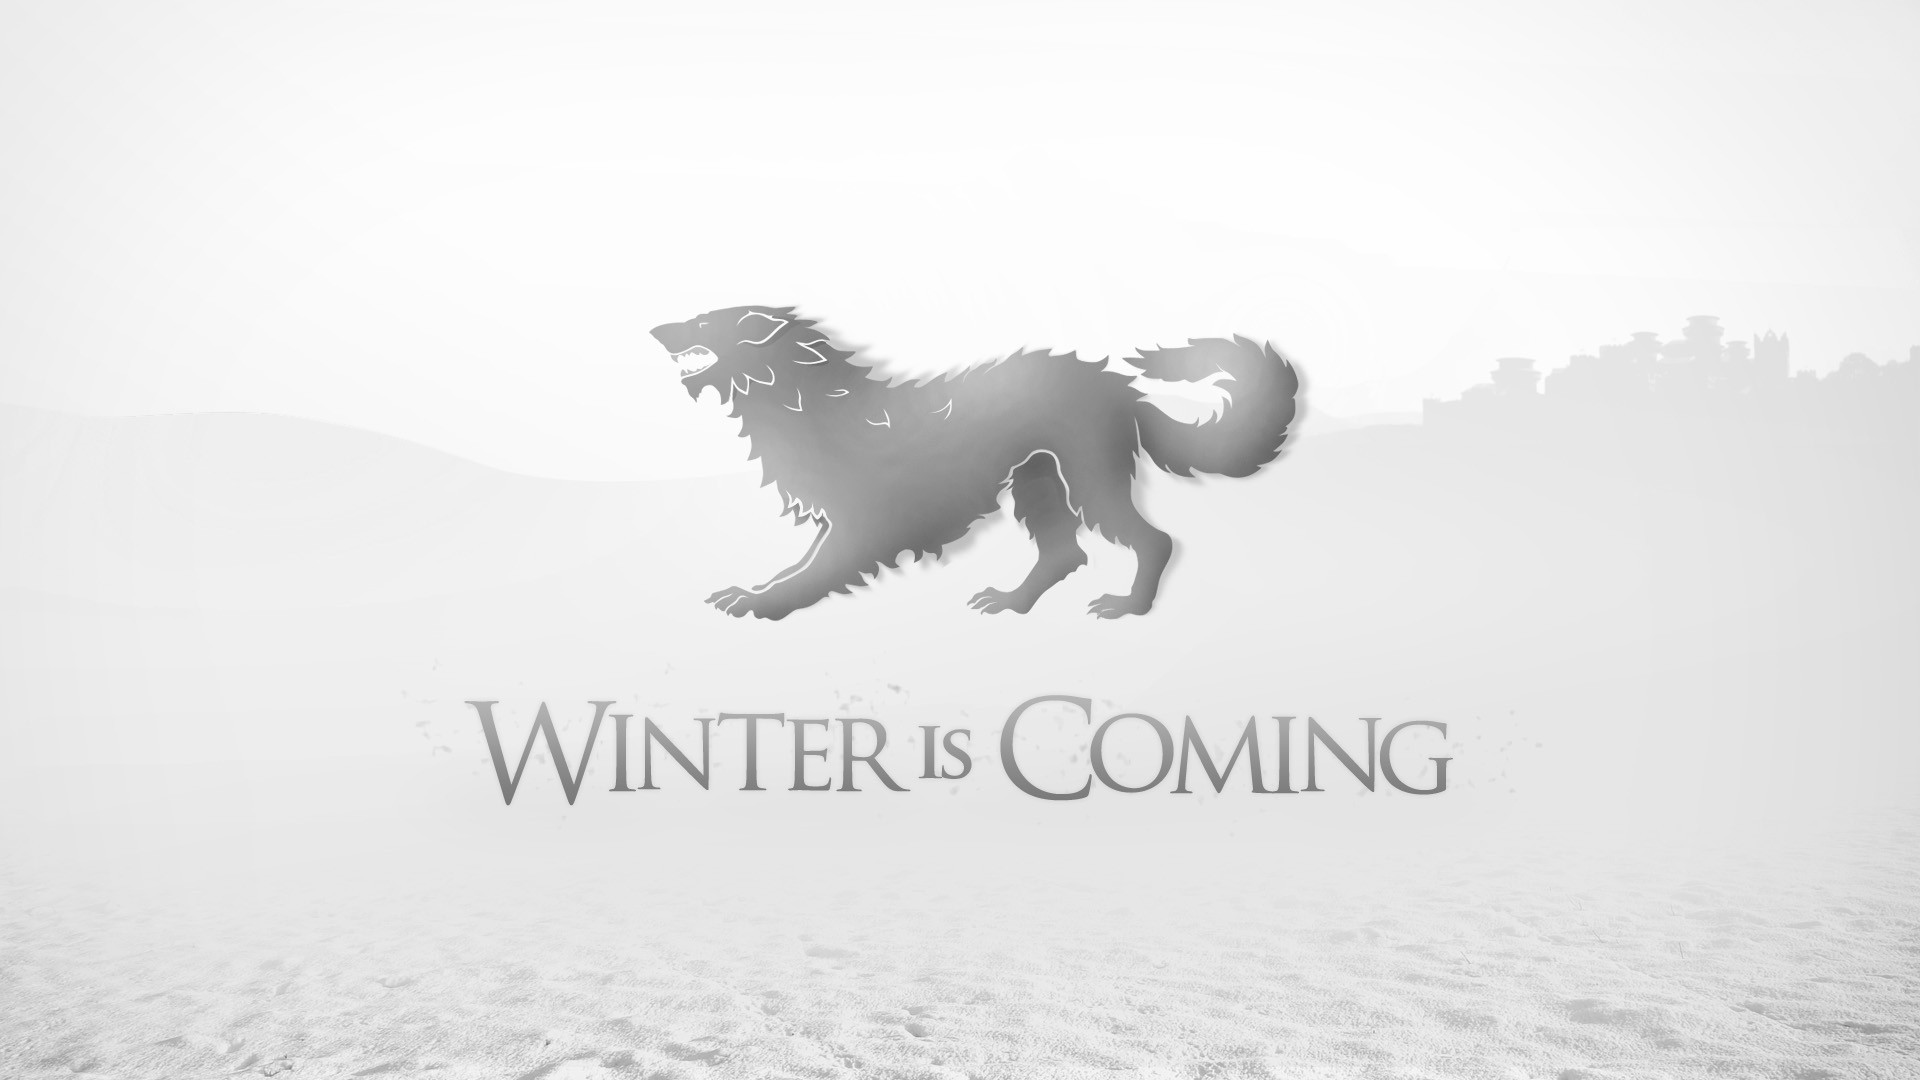 General 1920x1080 Game of Thrones Winter Is Coming House Stark Direwolf TV series